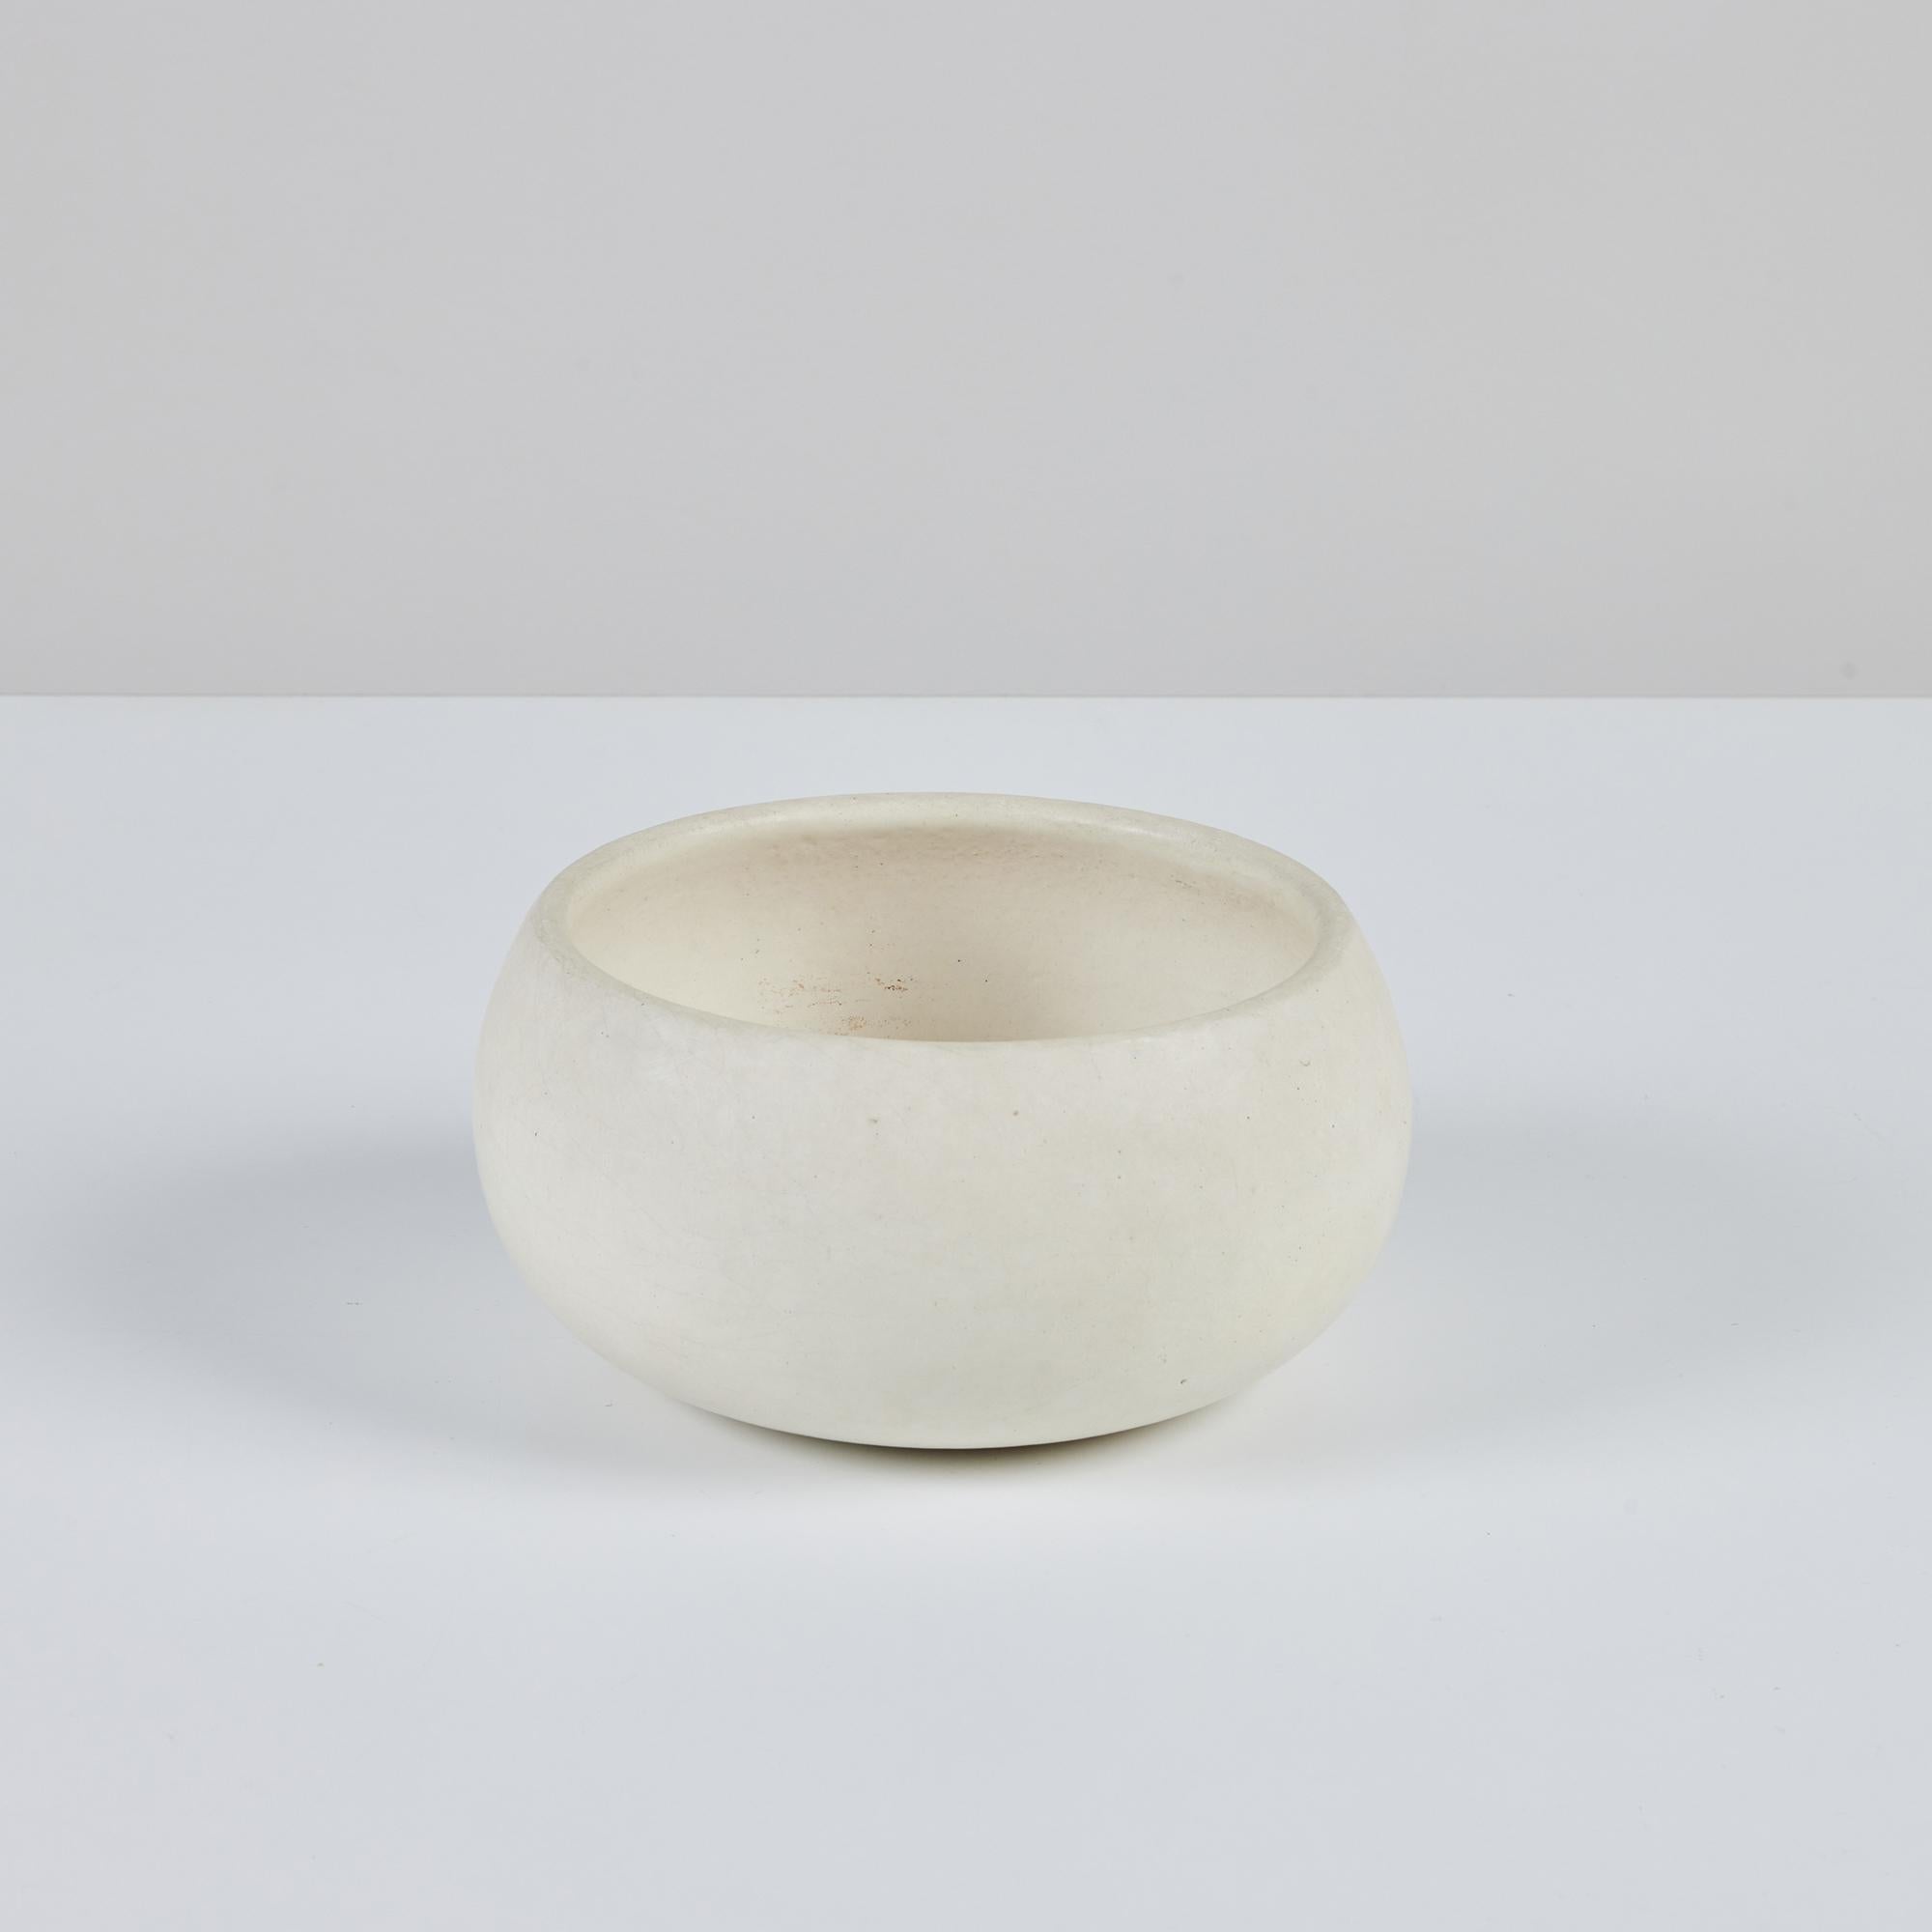 White bisque planter by John Follis for Architectural Pottery, USA. This example has a soft rounded bowl shape. A perfect size for a table top or shelf.

Dimensions
7